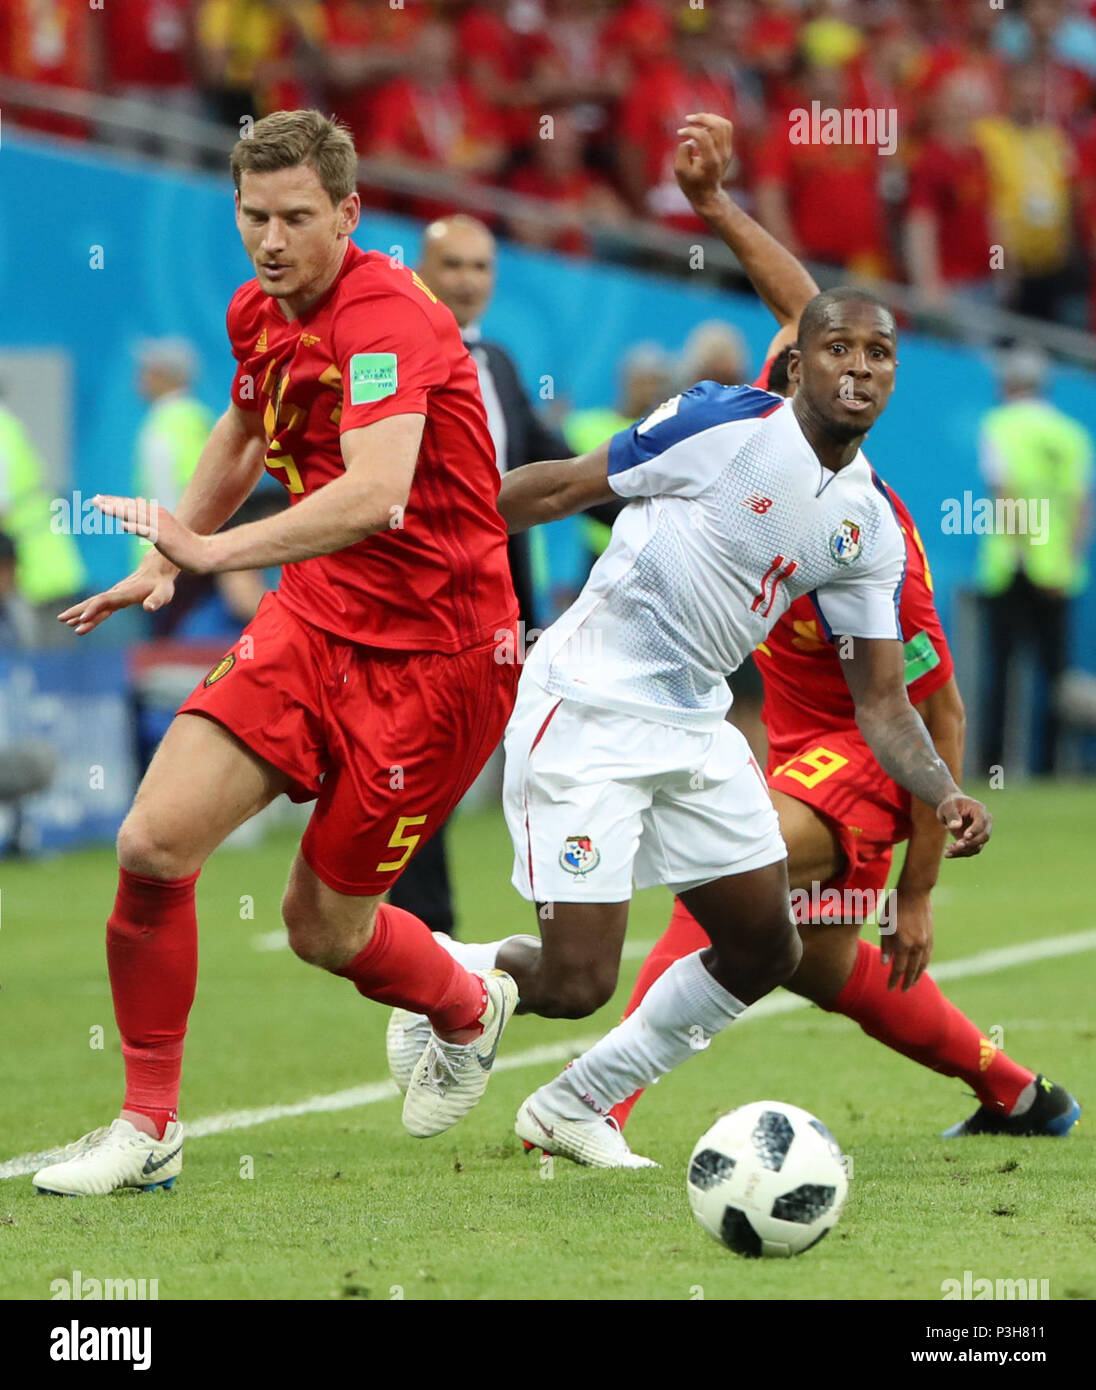 Sochi, Russia. 18th June, 2018. Jan Vertonghen (L) of Belgium vies with Armando Cooper of Panama during a group G match between Belgium and Panama at the 2018 FIFA World Cup in Sochi, Russia, June 18, 2018. Credit: Bai Xueqi/Xinhua/Alamy Live News Stock Photo